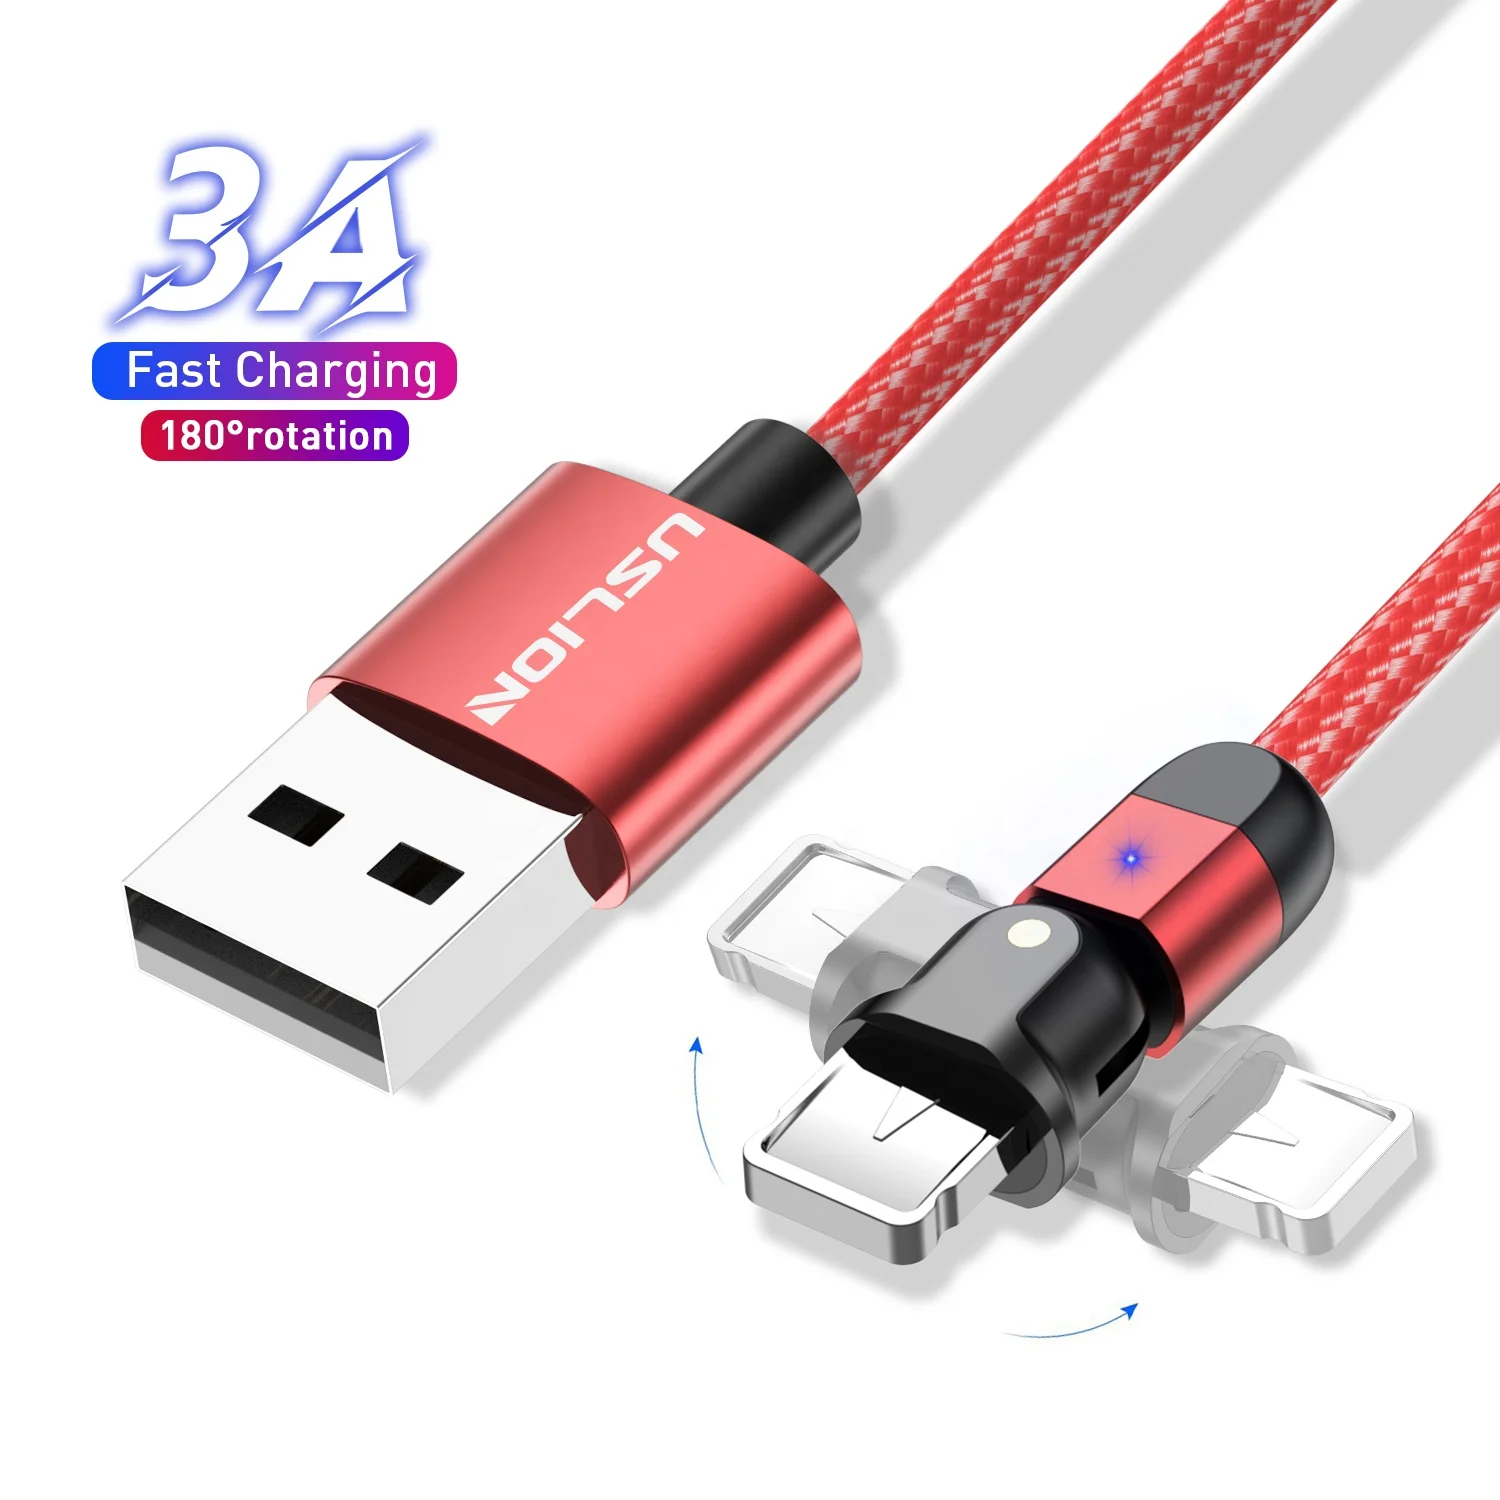 

USLION 180 Rotate USB data cable 8pin for apple charger for iphone charger 6 7 8 XR 11 12 Fast Charging USB cable, Black red purple silver